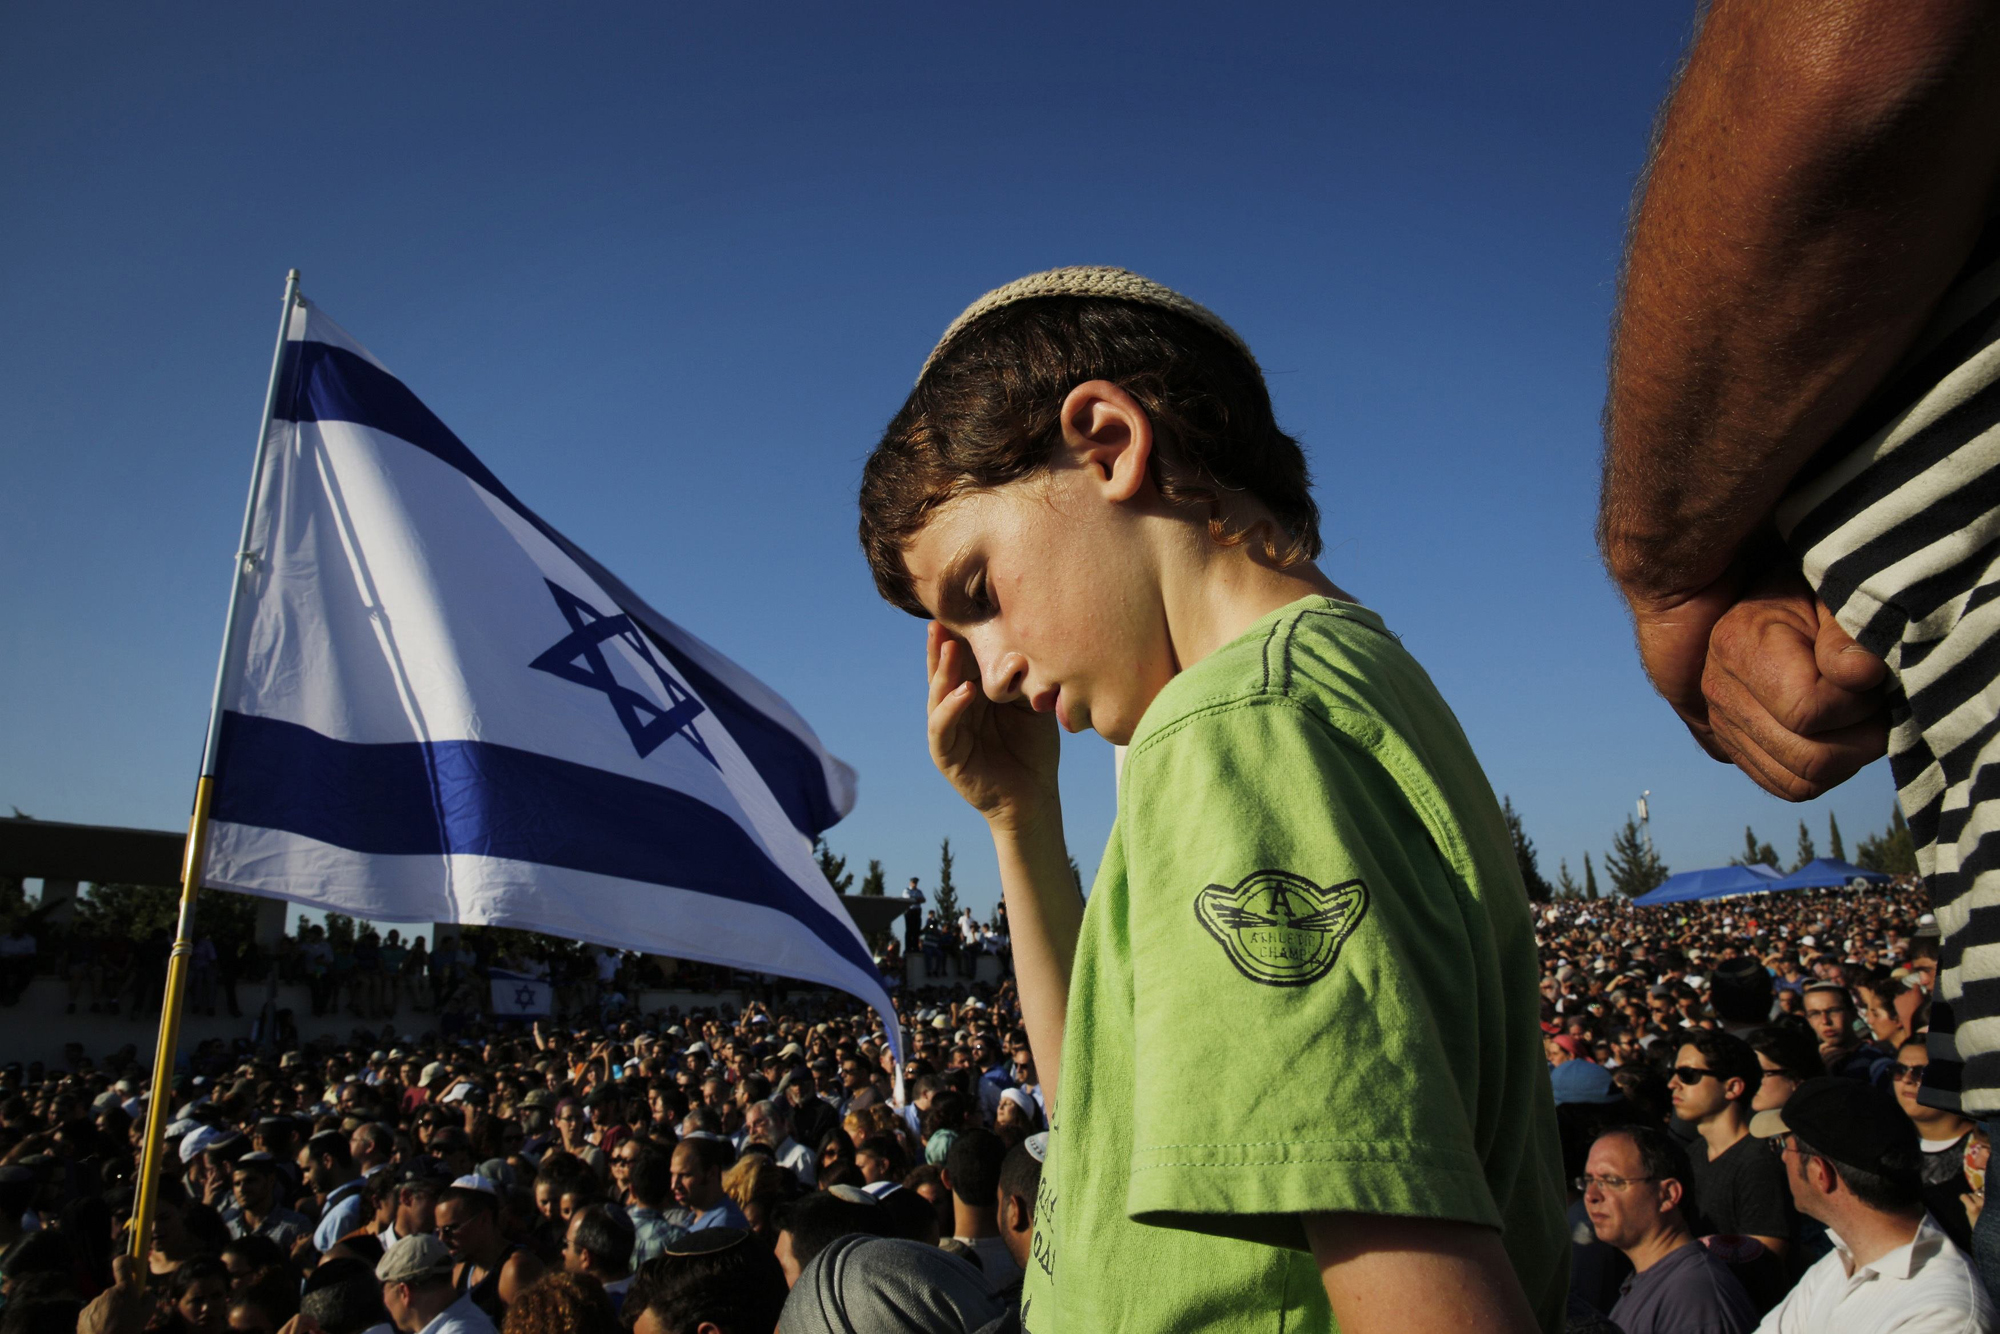 An Israeli boy attends the joint funeral of three Israeli teens, Gil-Ad Shaer, U.S.-Israeli national Naftali Fraenkel, both 16, and Eyal Yifrah, 19, who were abducted and killed in the occupied West Bank, in the Israeli city of Modi'in July 1.